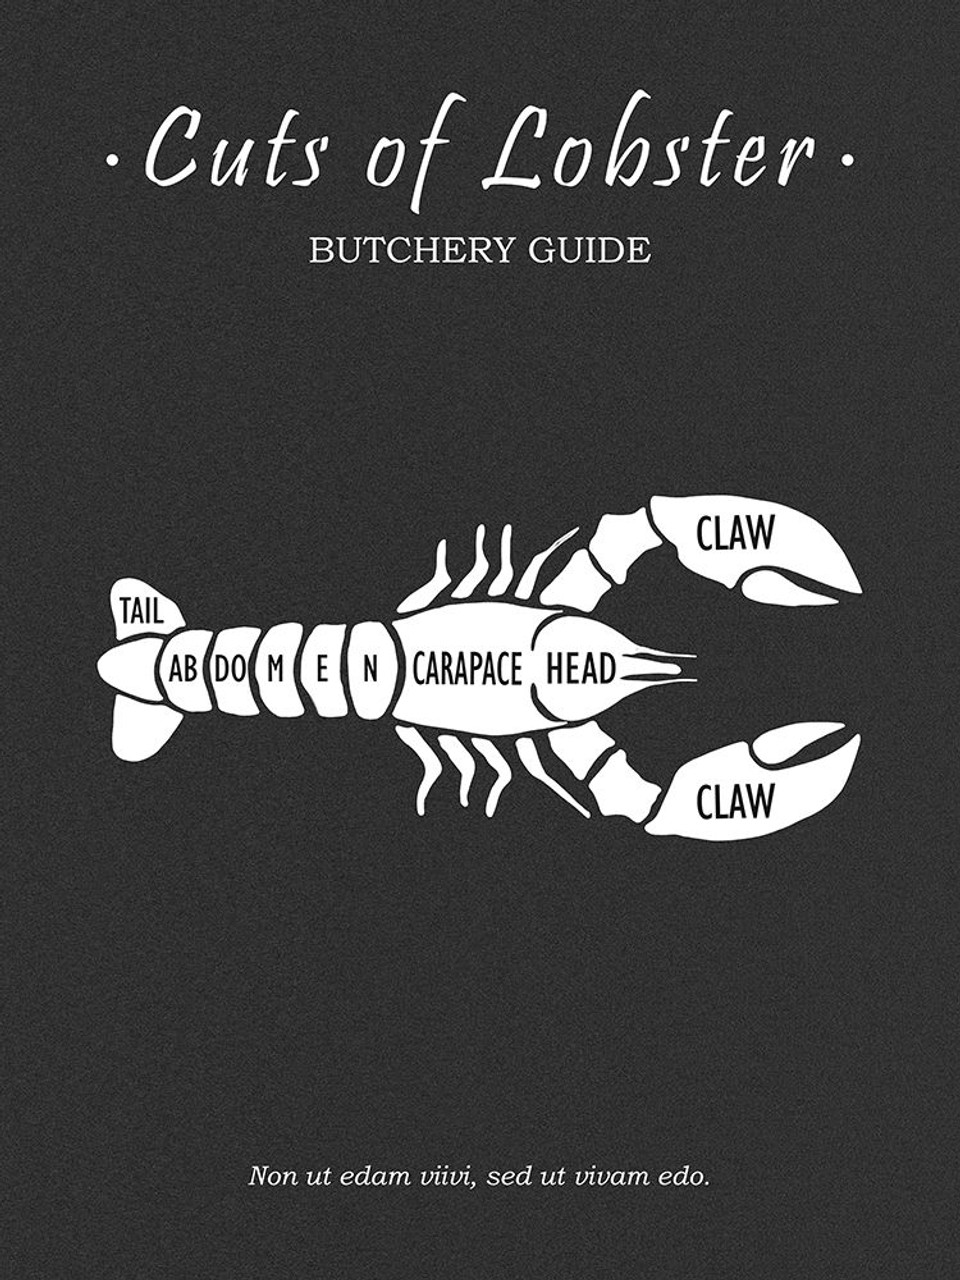 Butchery Lobster Poster Print by Rogan # RGN116690 - Posterazzi